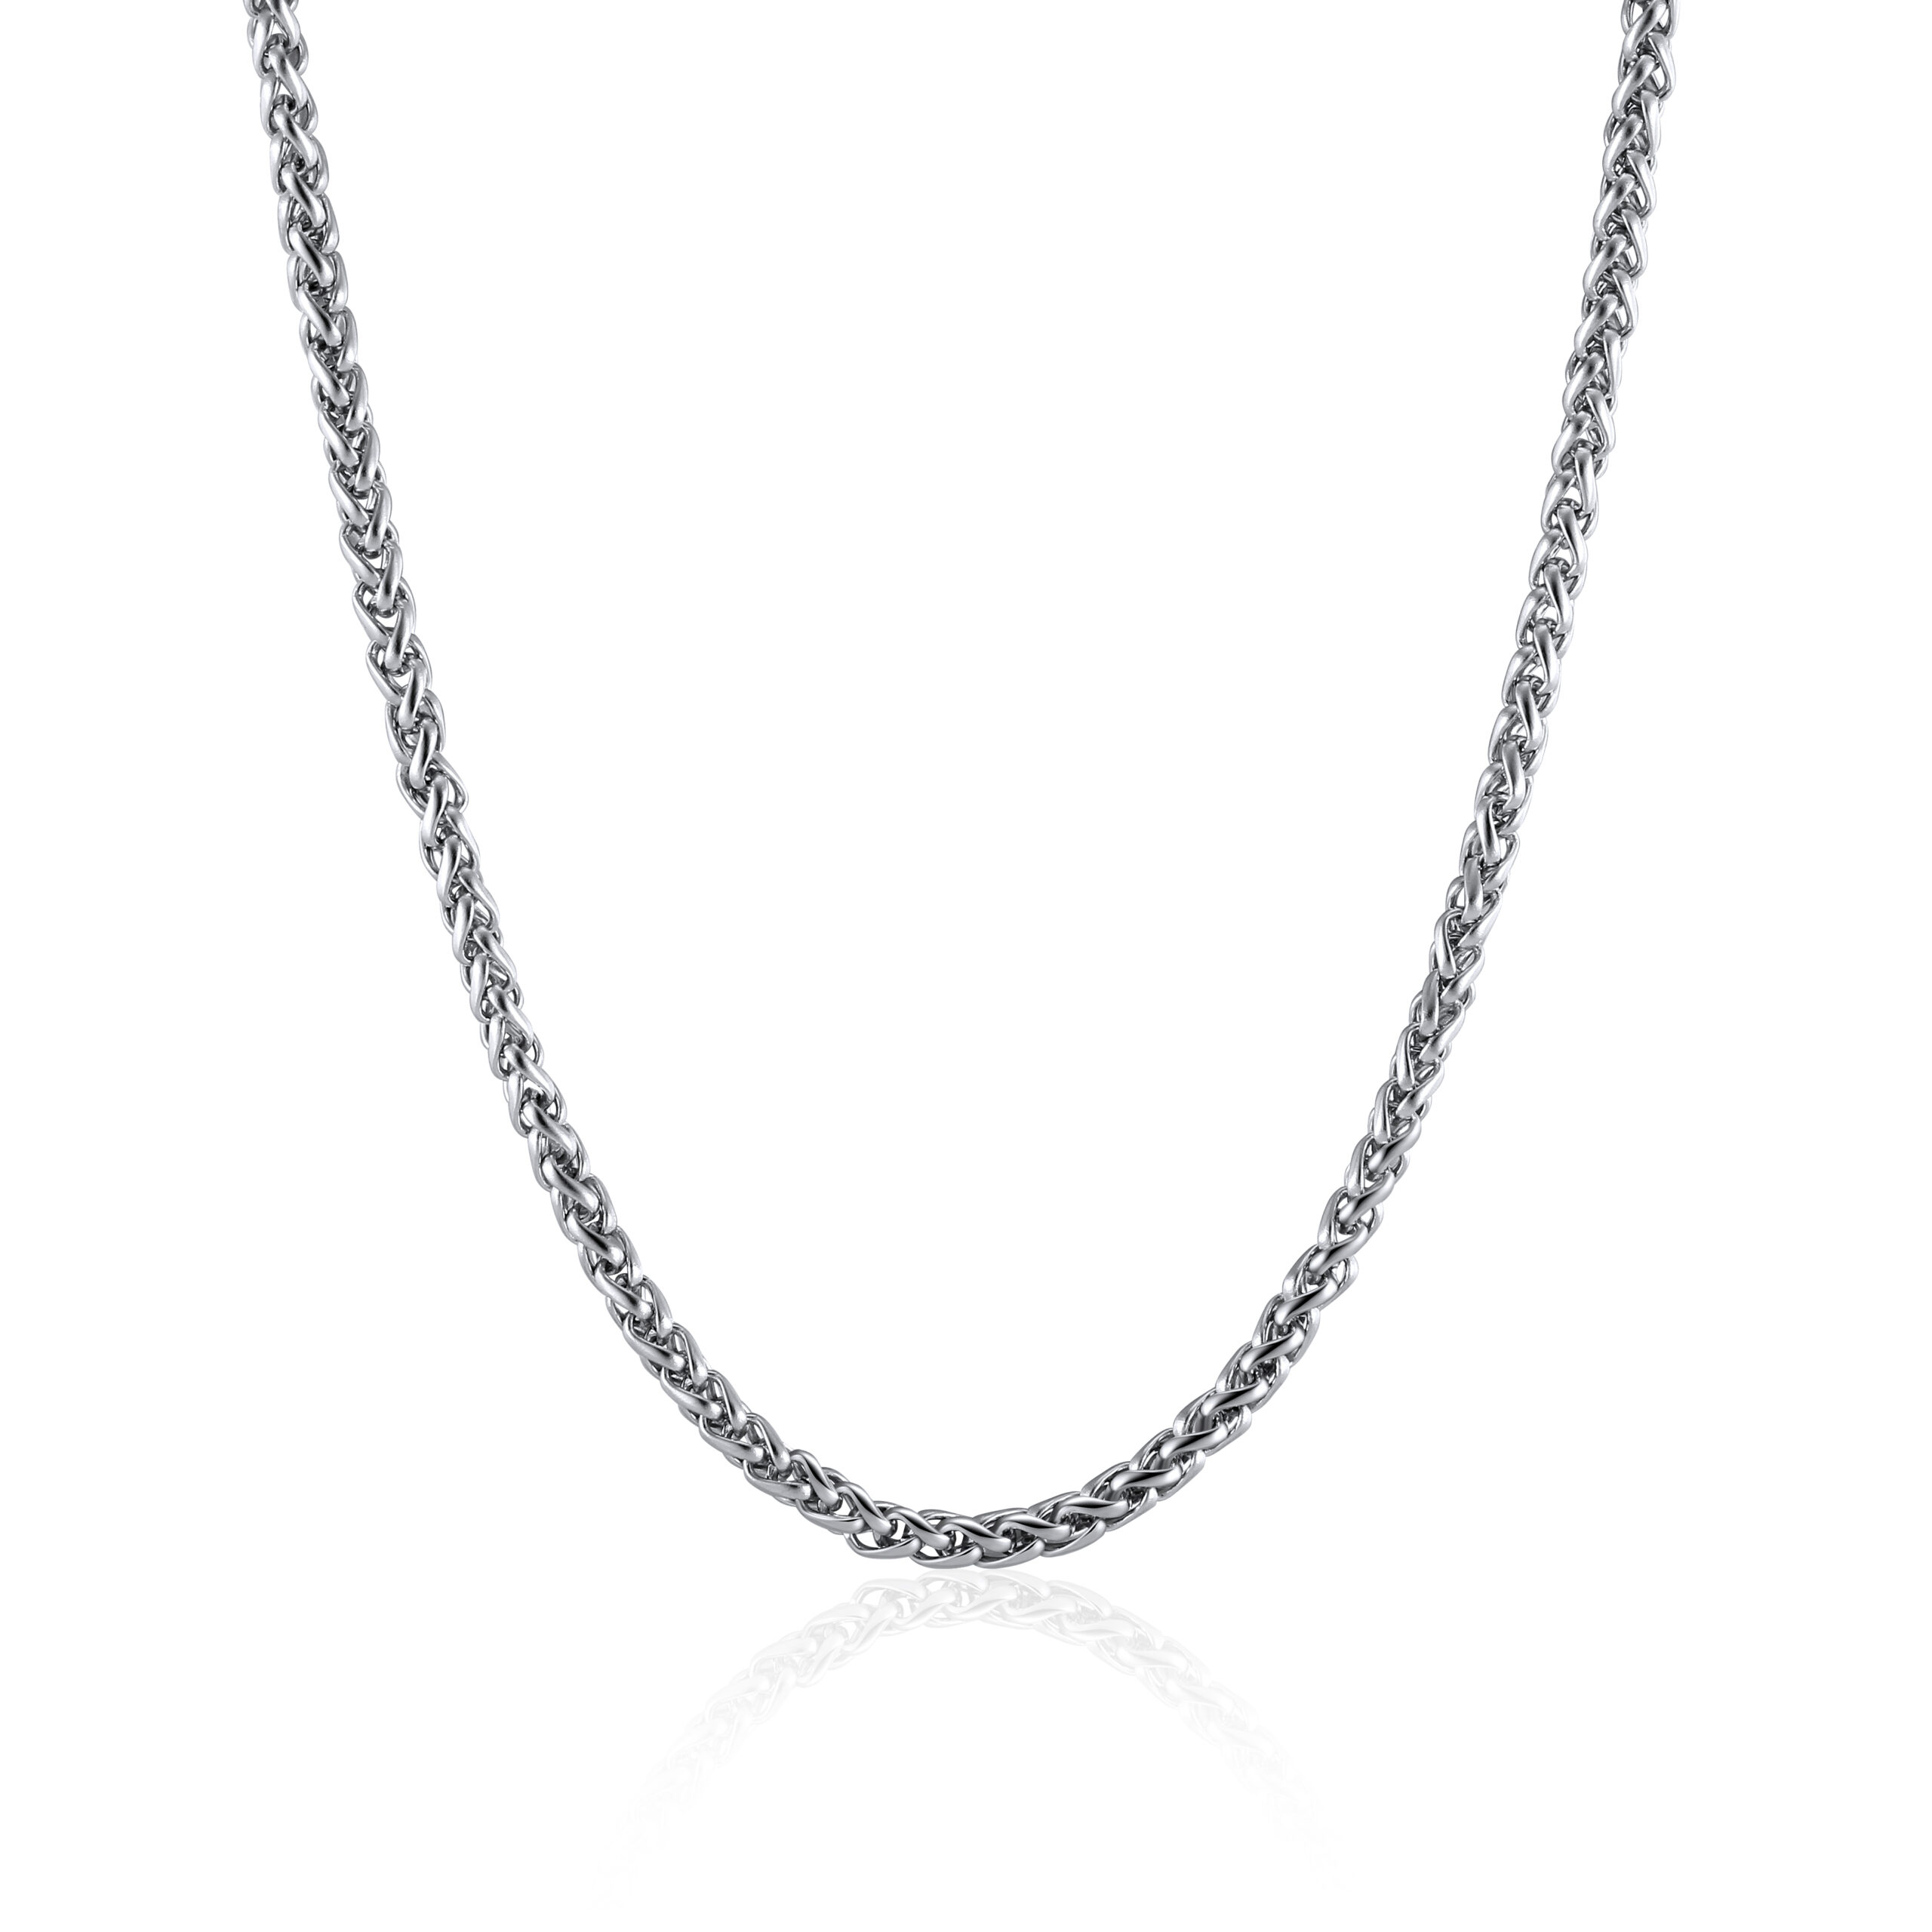 2 or 3 inch Chain Extender | Caitlyn Minimalist Sterling Silver / 2 Inches